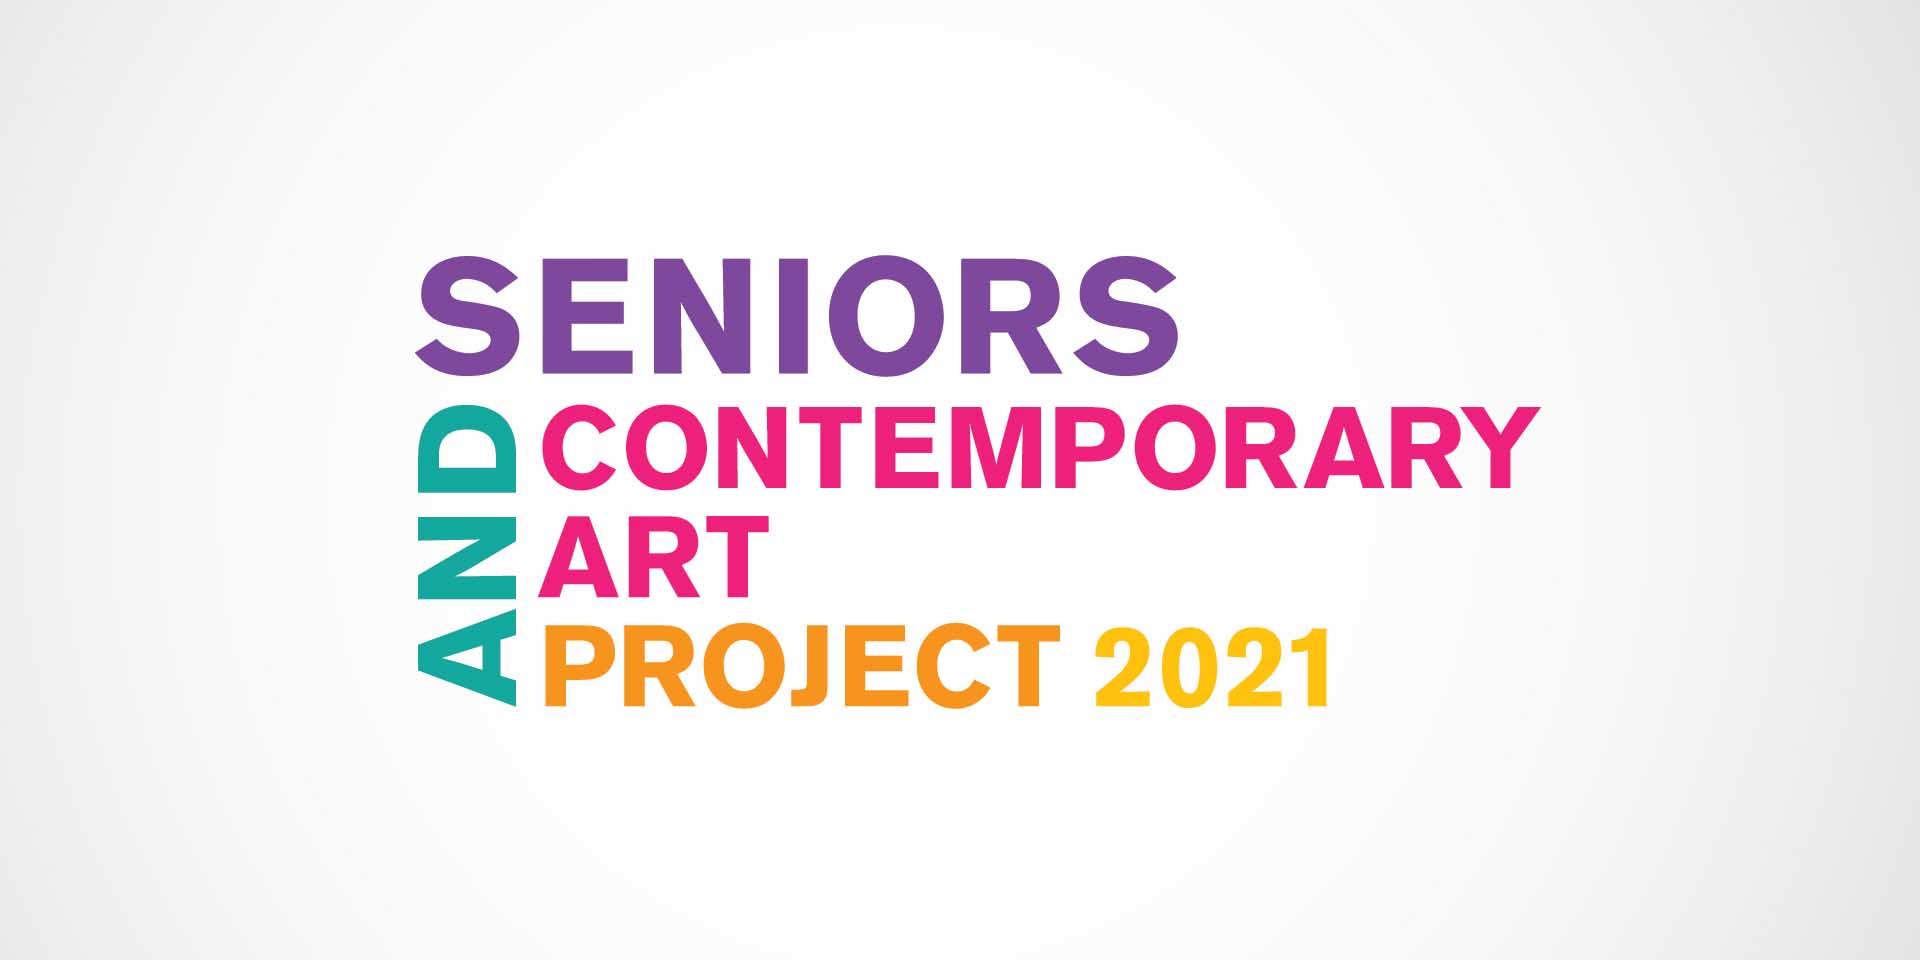 Seniors and Contemporary Art Project